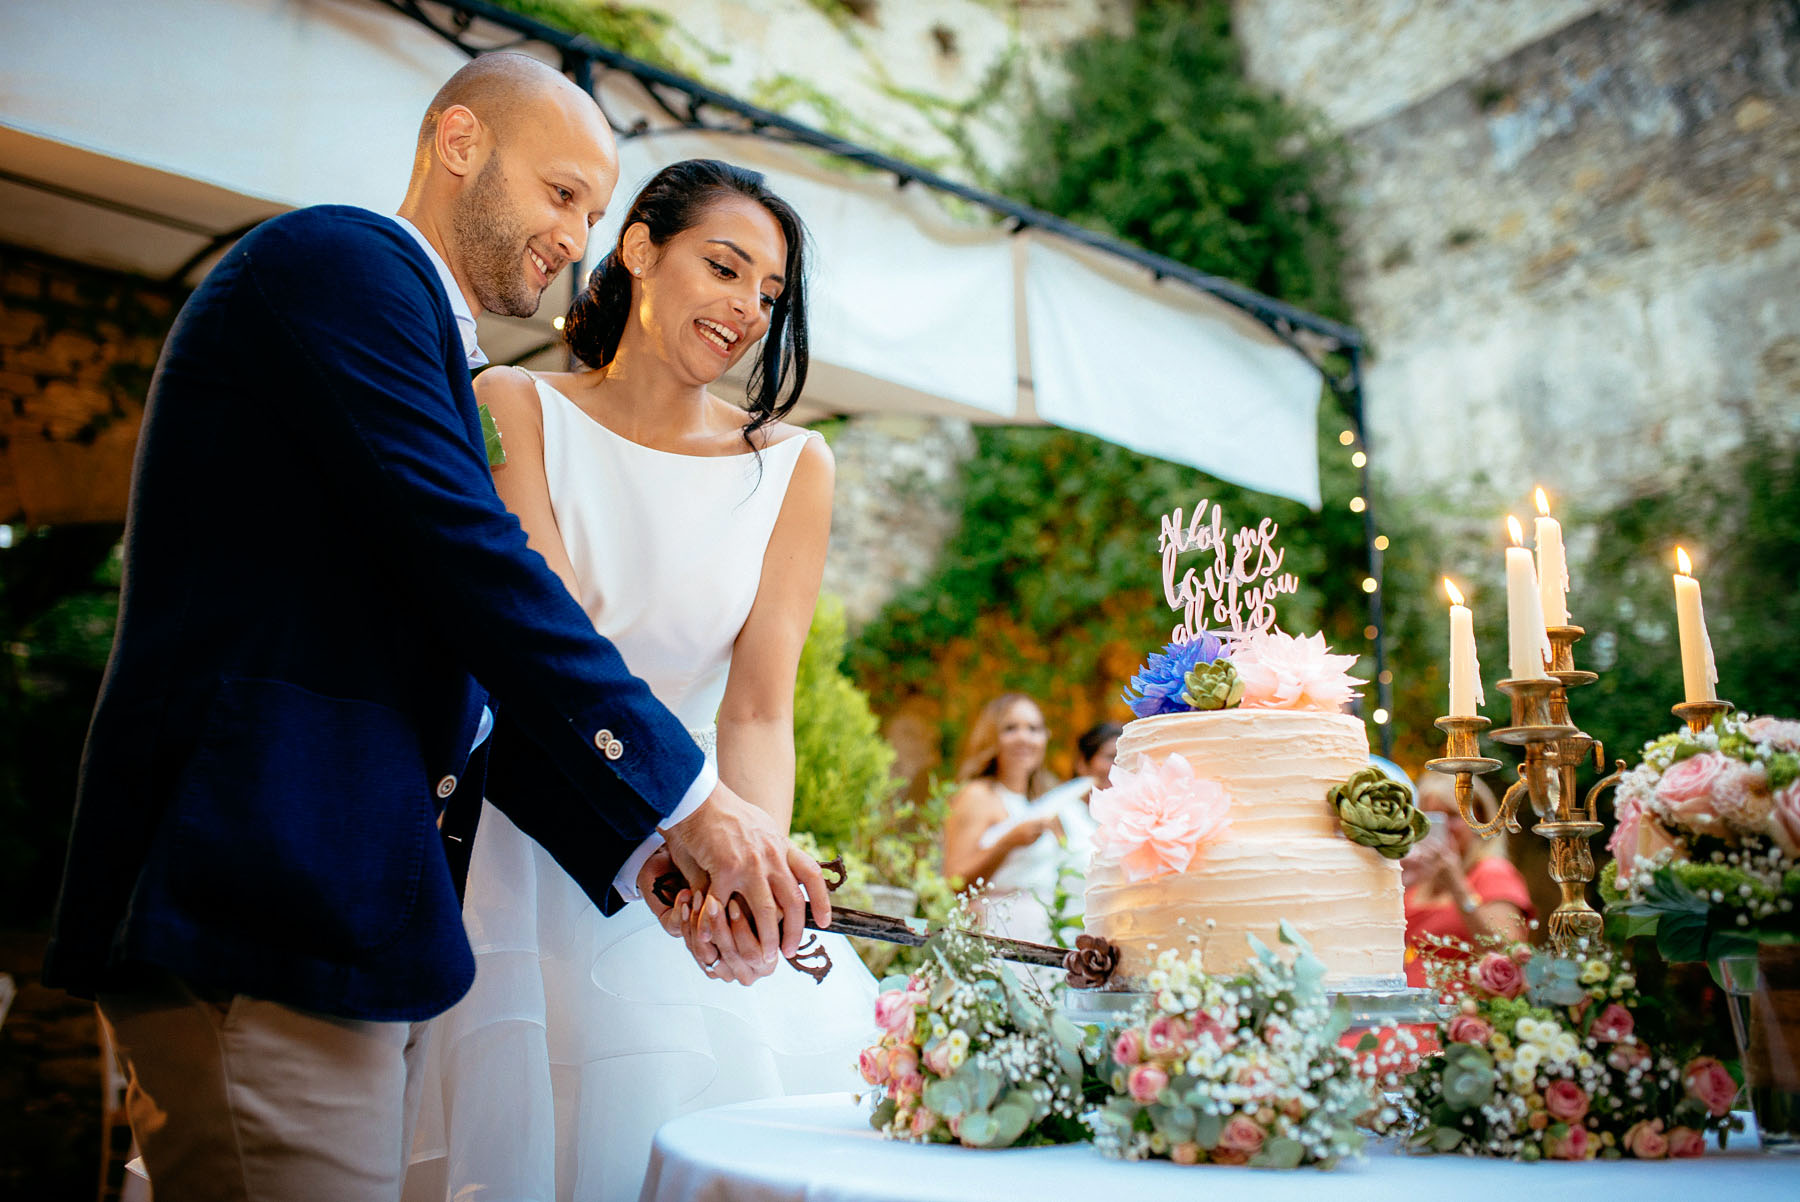 Wedding in L'Abbey de Camon in the South of France